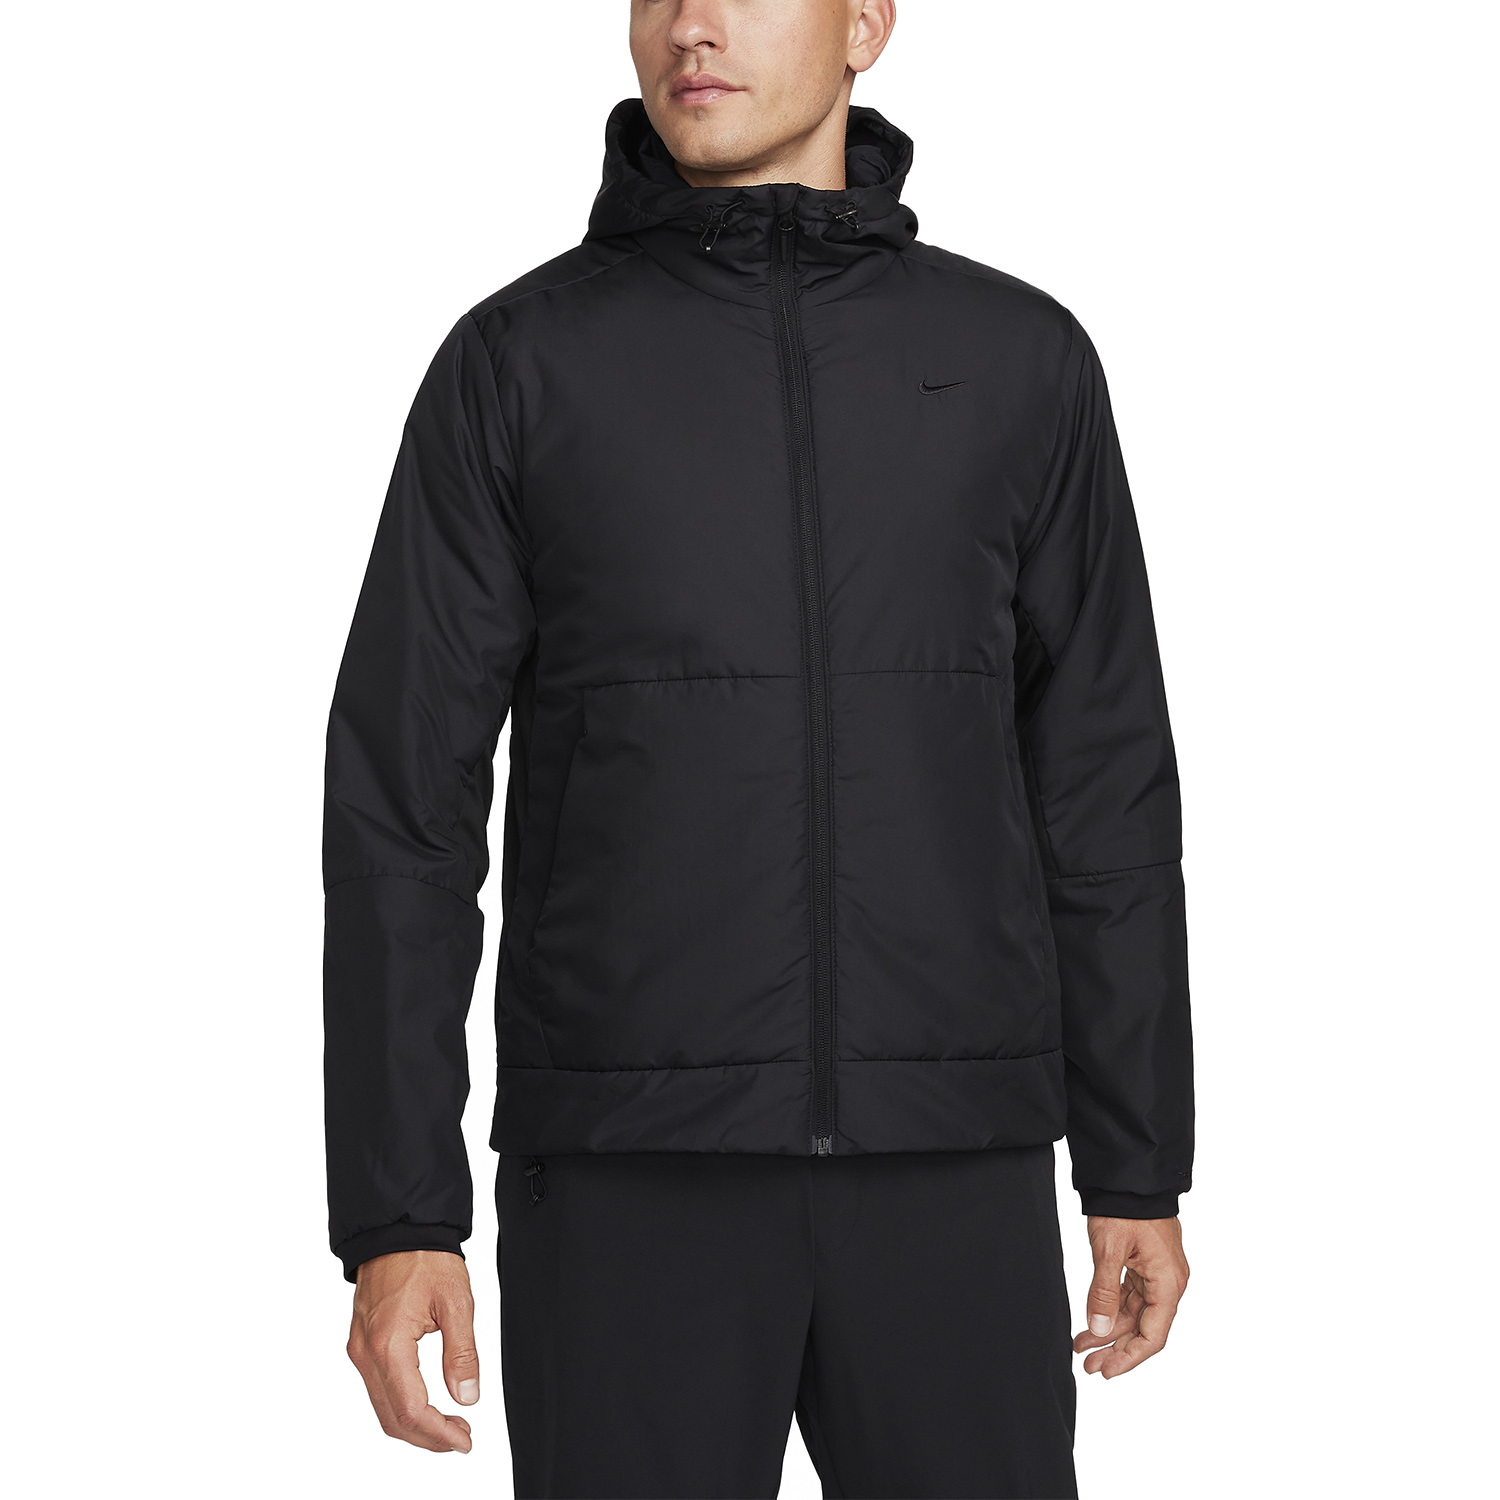 Nike Unlimited Therma-FIT Men's Training Jacket - Black